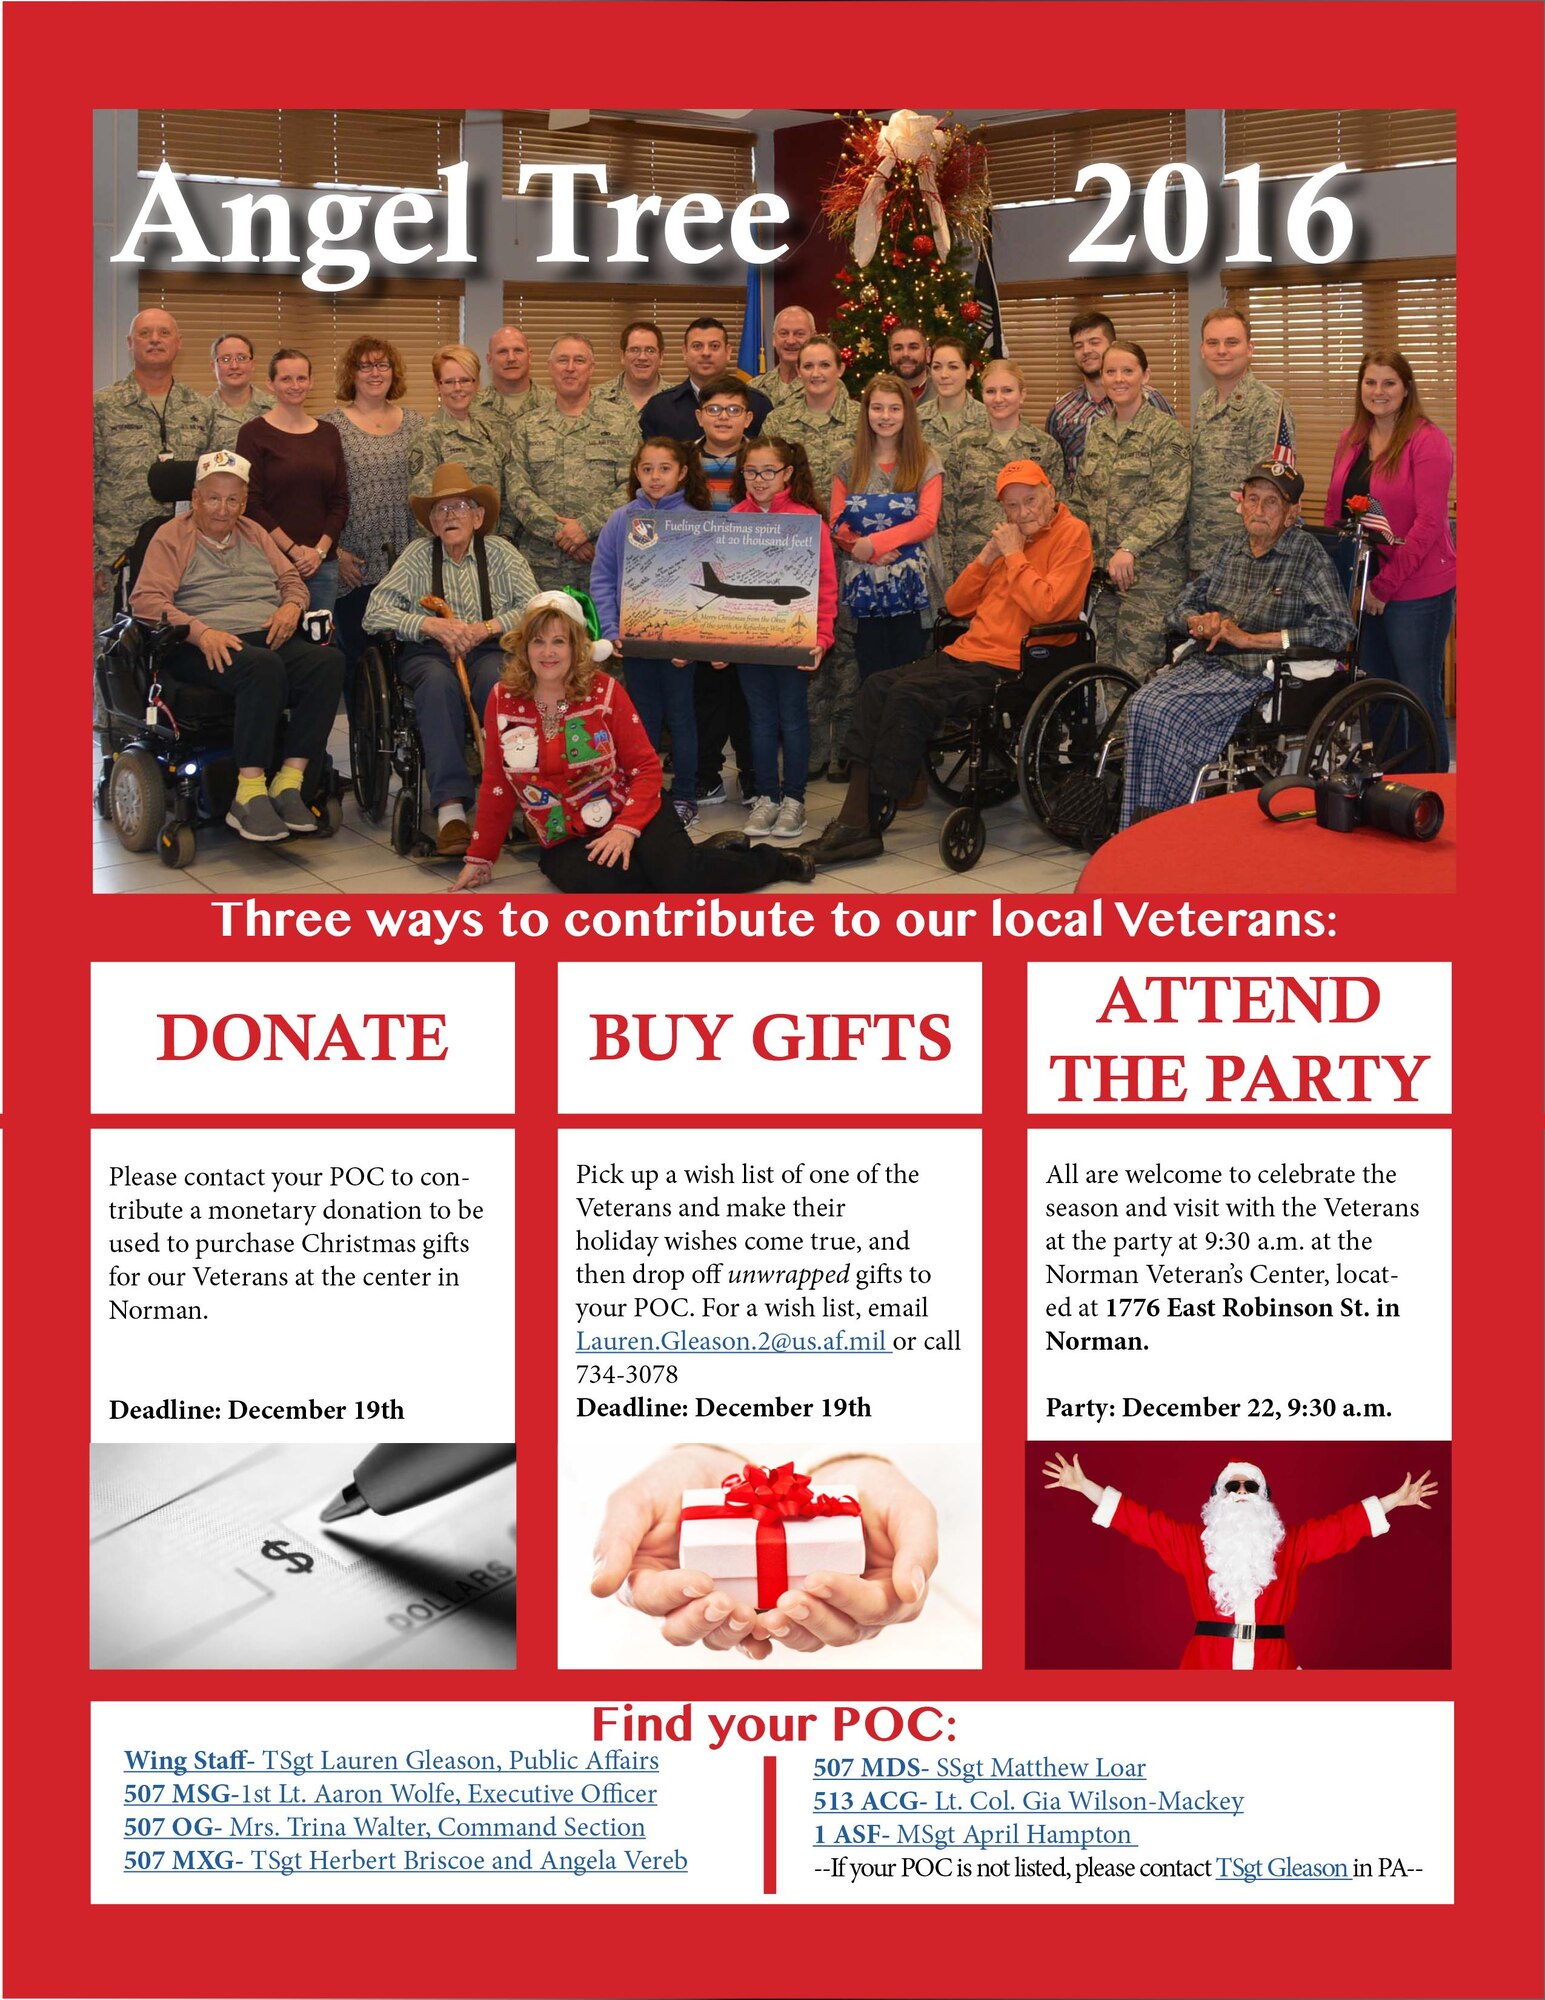 Reservists and their families at Tinker are scheduled to visit the Norman Veteran’s Center at 9:30 a.m. Dec. 22 to celebrate the holidays with our nation’s heroes.
Everyone is invited to join the 21st Annual Angel Tree party celebration and to help reach the goal of raising $1200 for the Veterans’ field trip fund before the Dec. 19 deadline.
